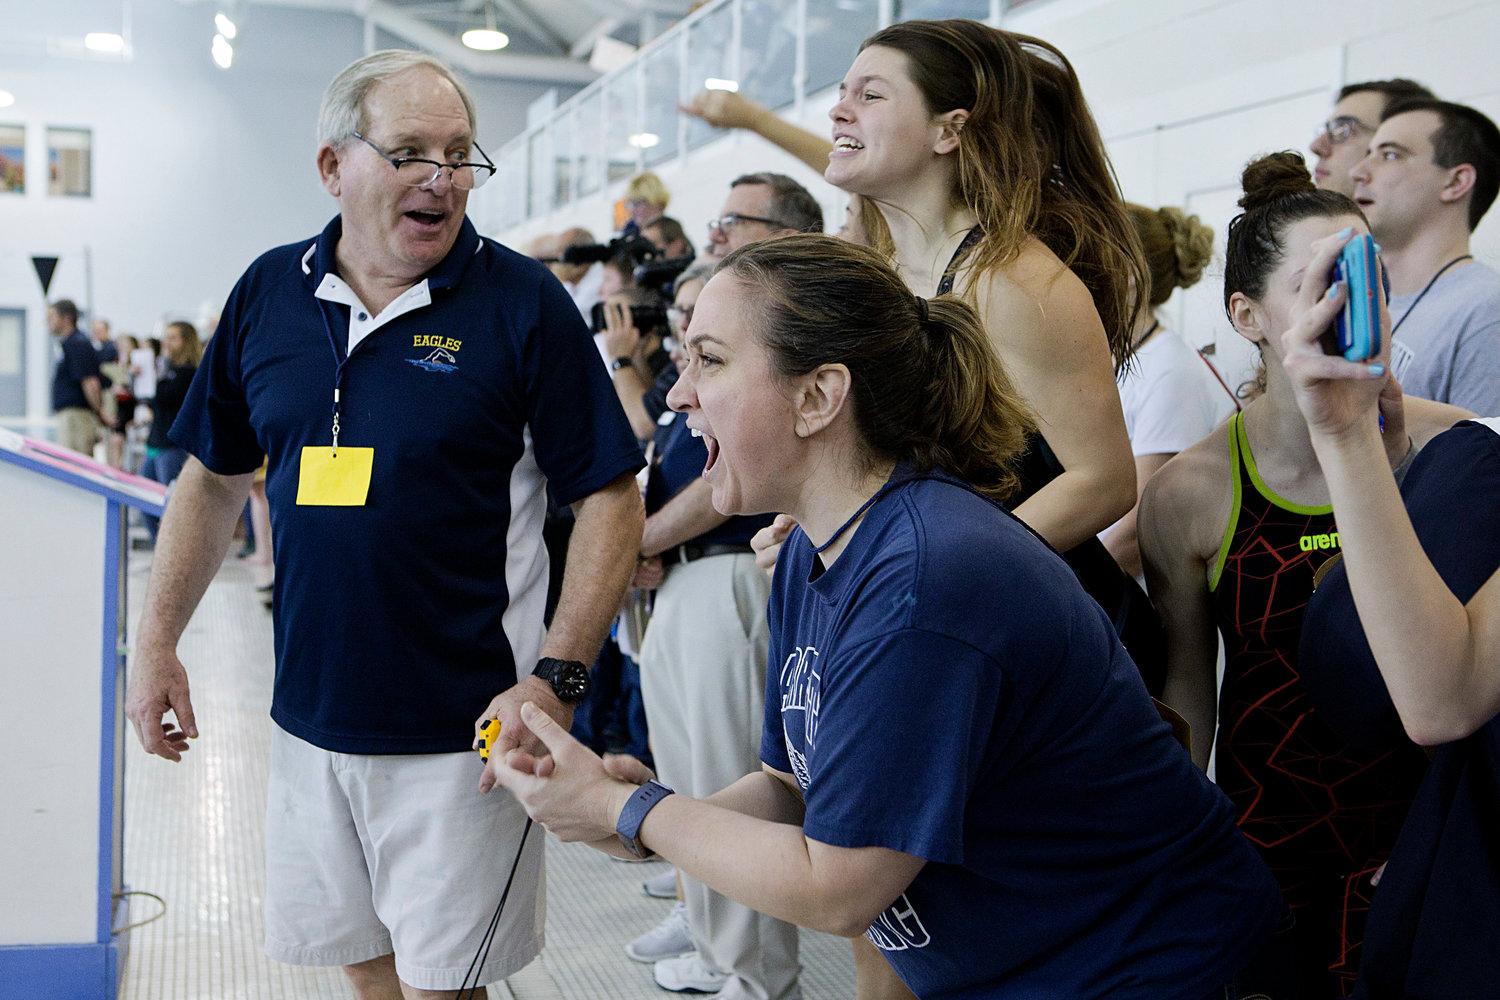 Barrington High School head coach Sandy Gorham (left) and assistant coach Jessica Mangione (right) cheer with their team as Sydni Diehl swims the final leg of the girls 400 yard freestyle relay at the state championship meet, Saturday.